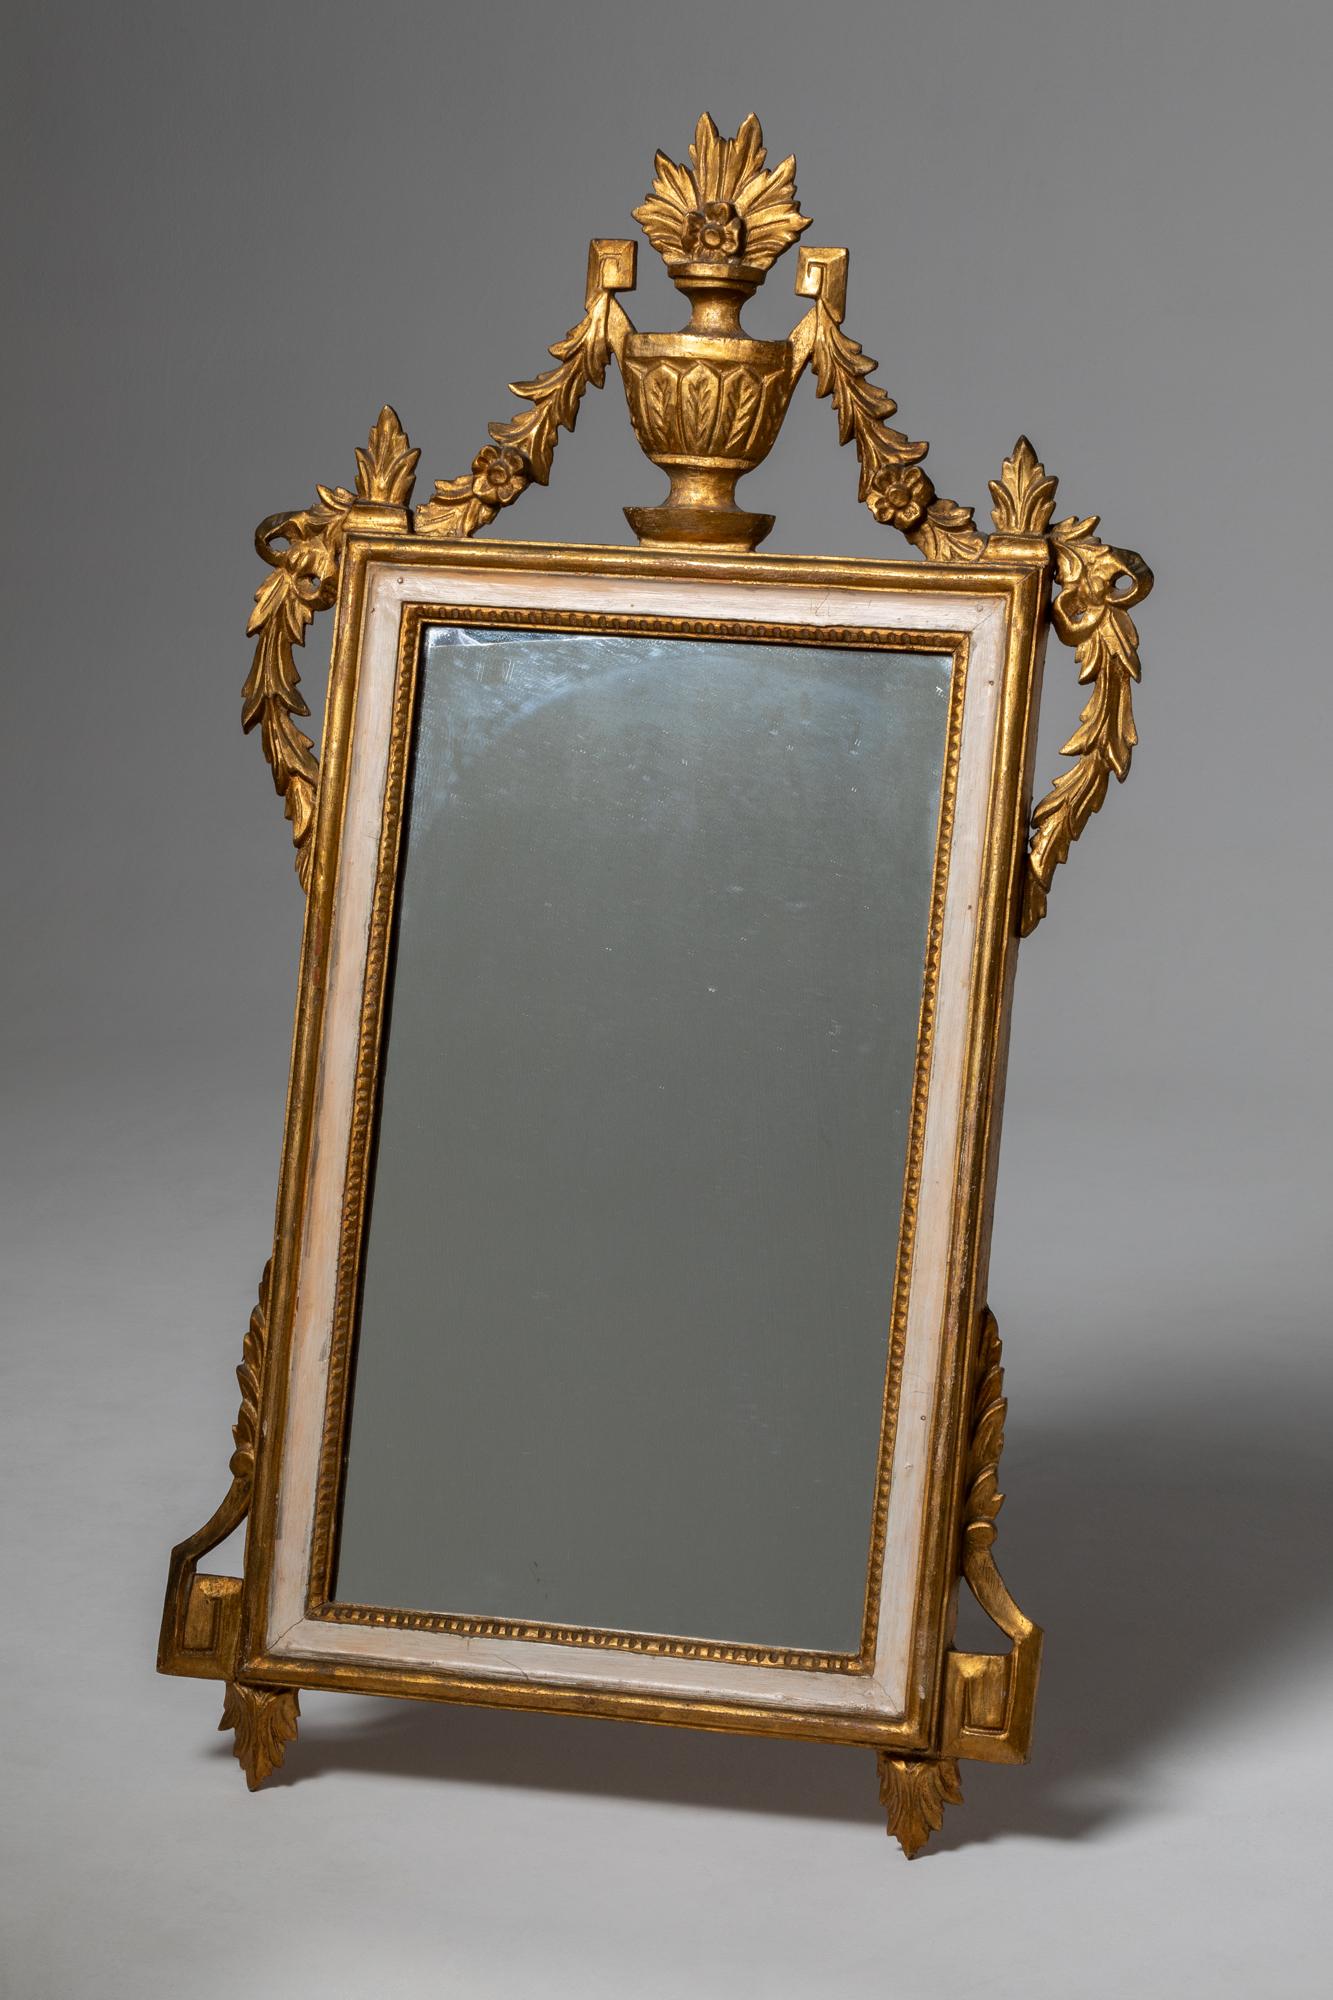 One fine example of the Mirrors of the time of Louis XVI

Louis XVI style refers to a design and artistic movement that emerged in France during the late 18th century, specifically during the reign of King Louis XVI (1774–1792). This period is